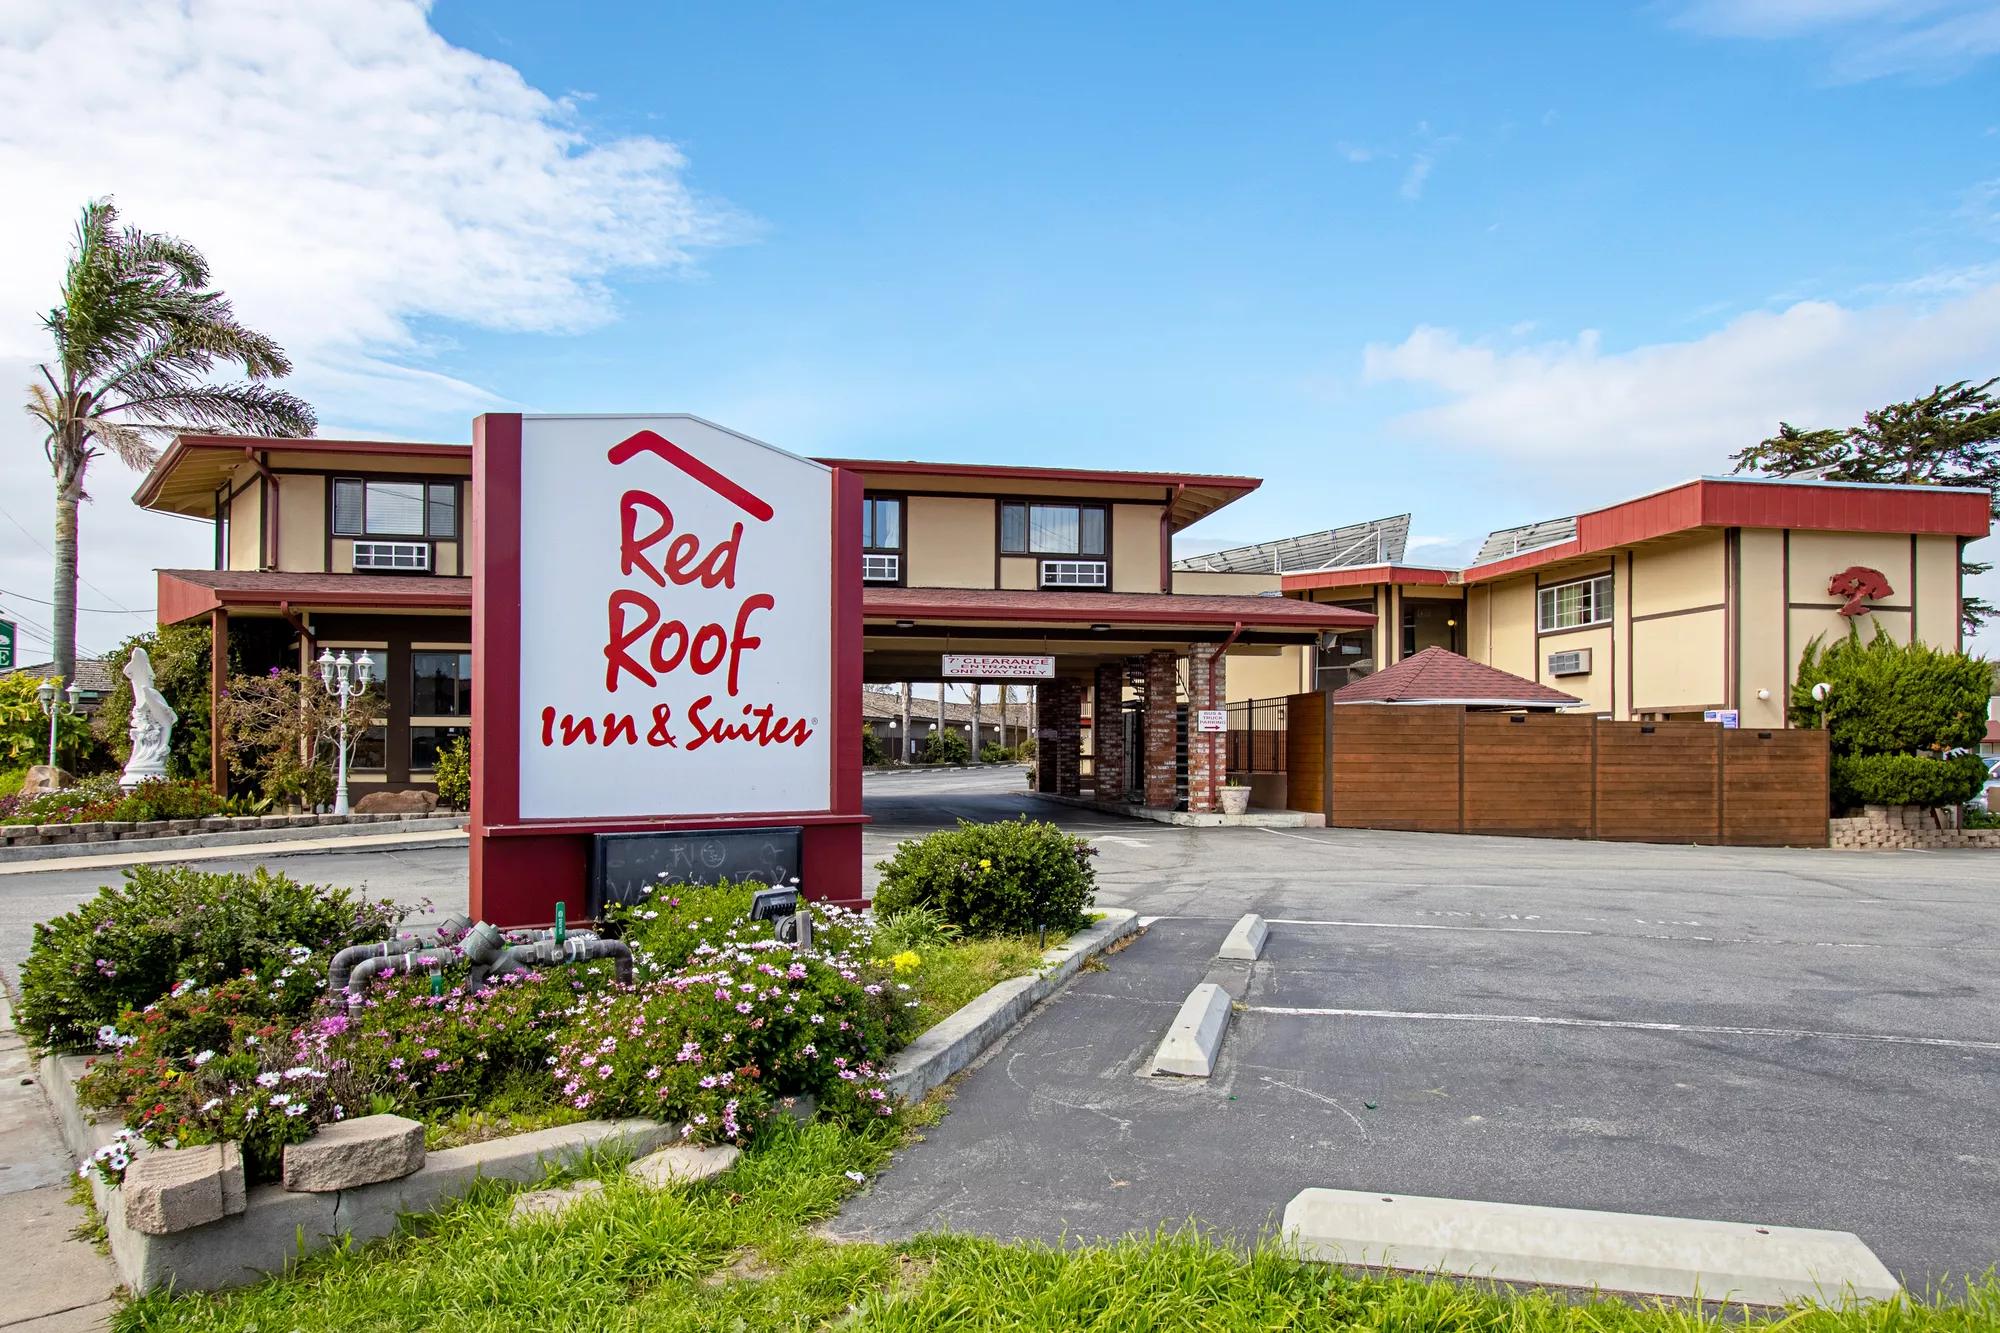 Red Roof Inn & Suites Monterey Exterior Property Image